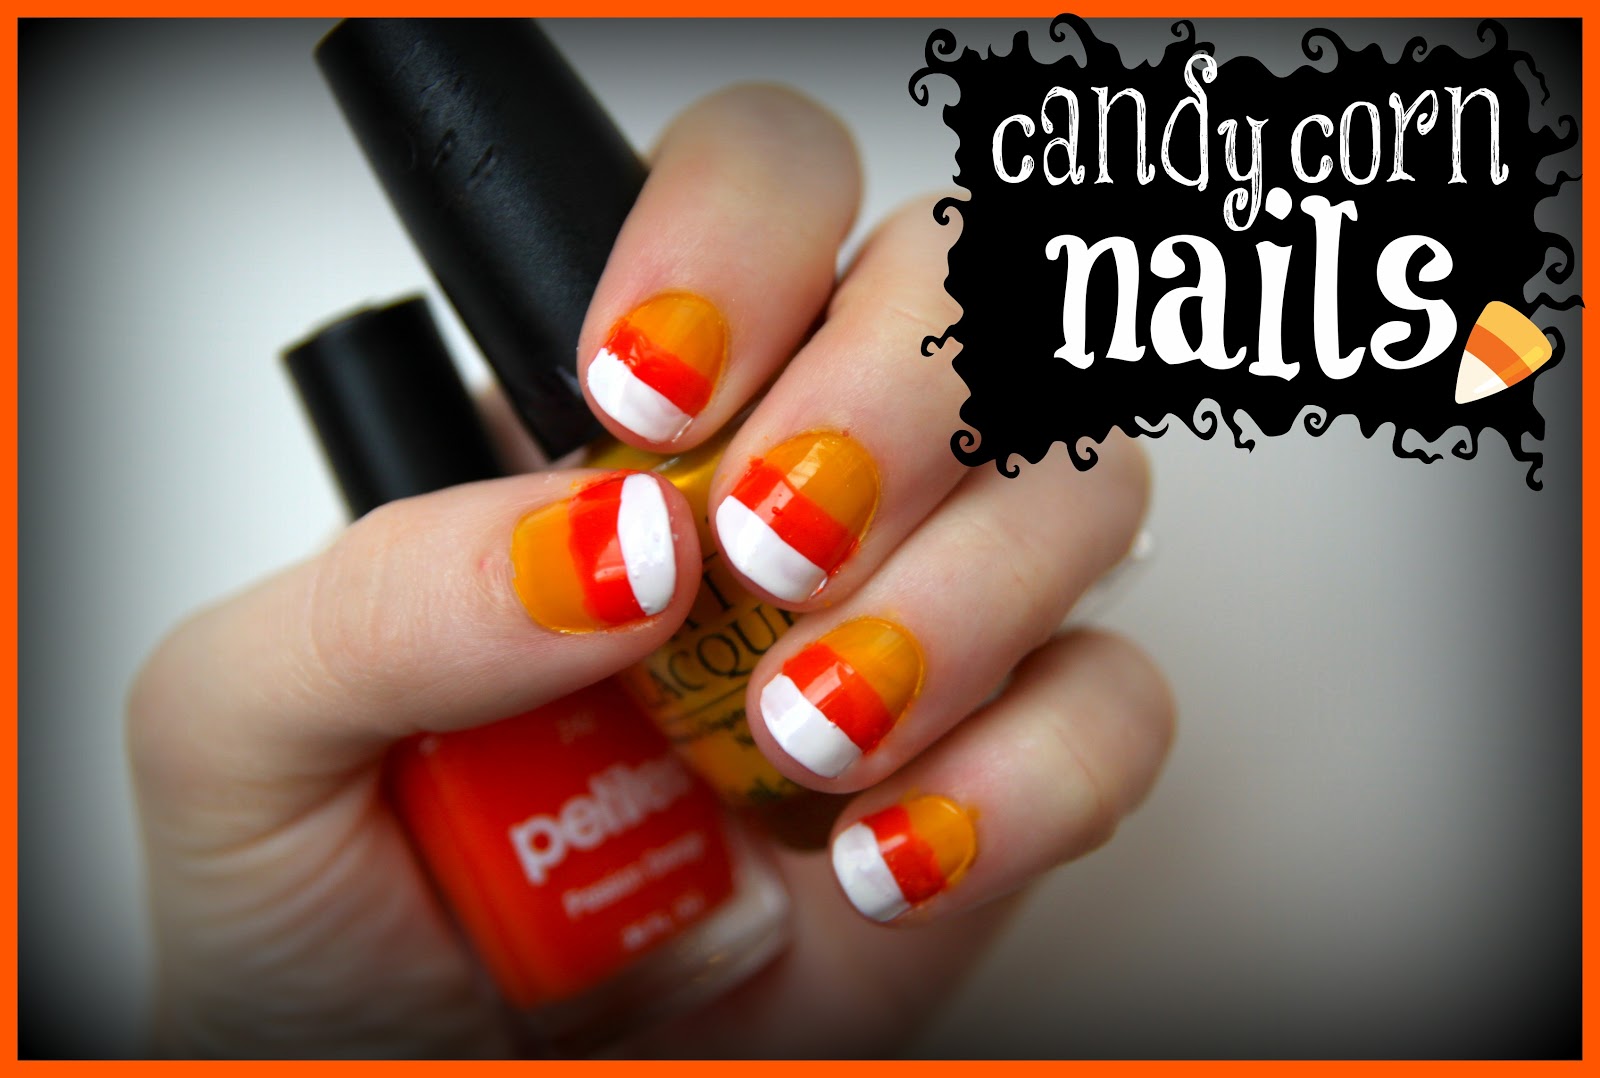 watch out for the woestmans: Candy Corn Nail Tutorial